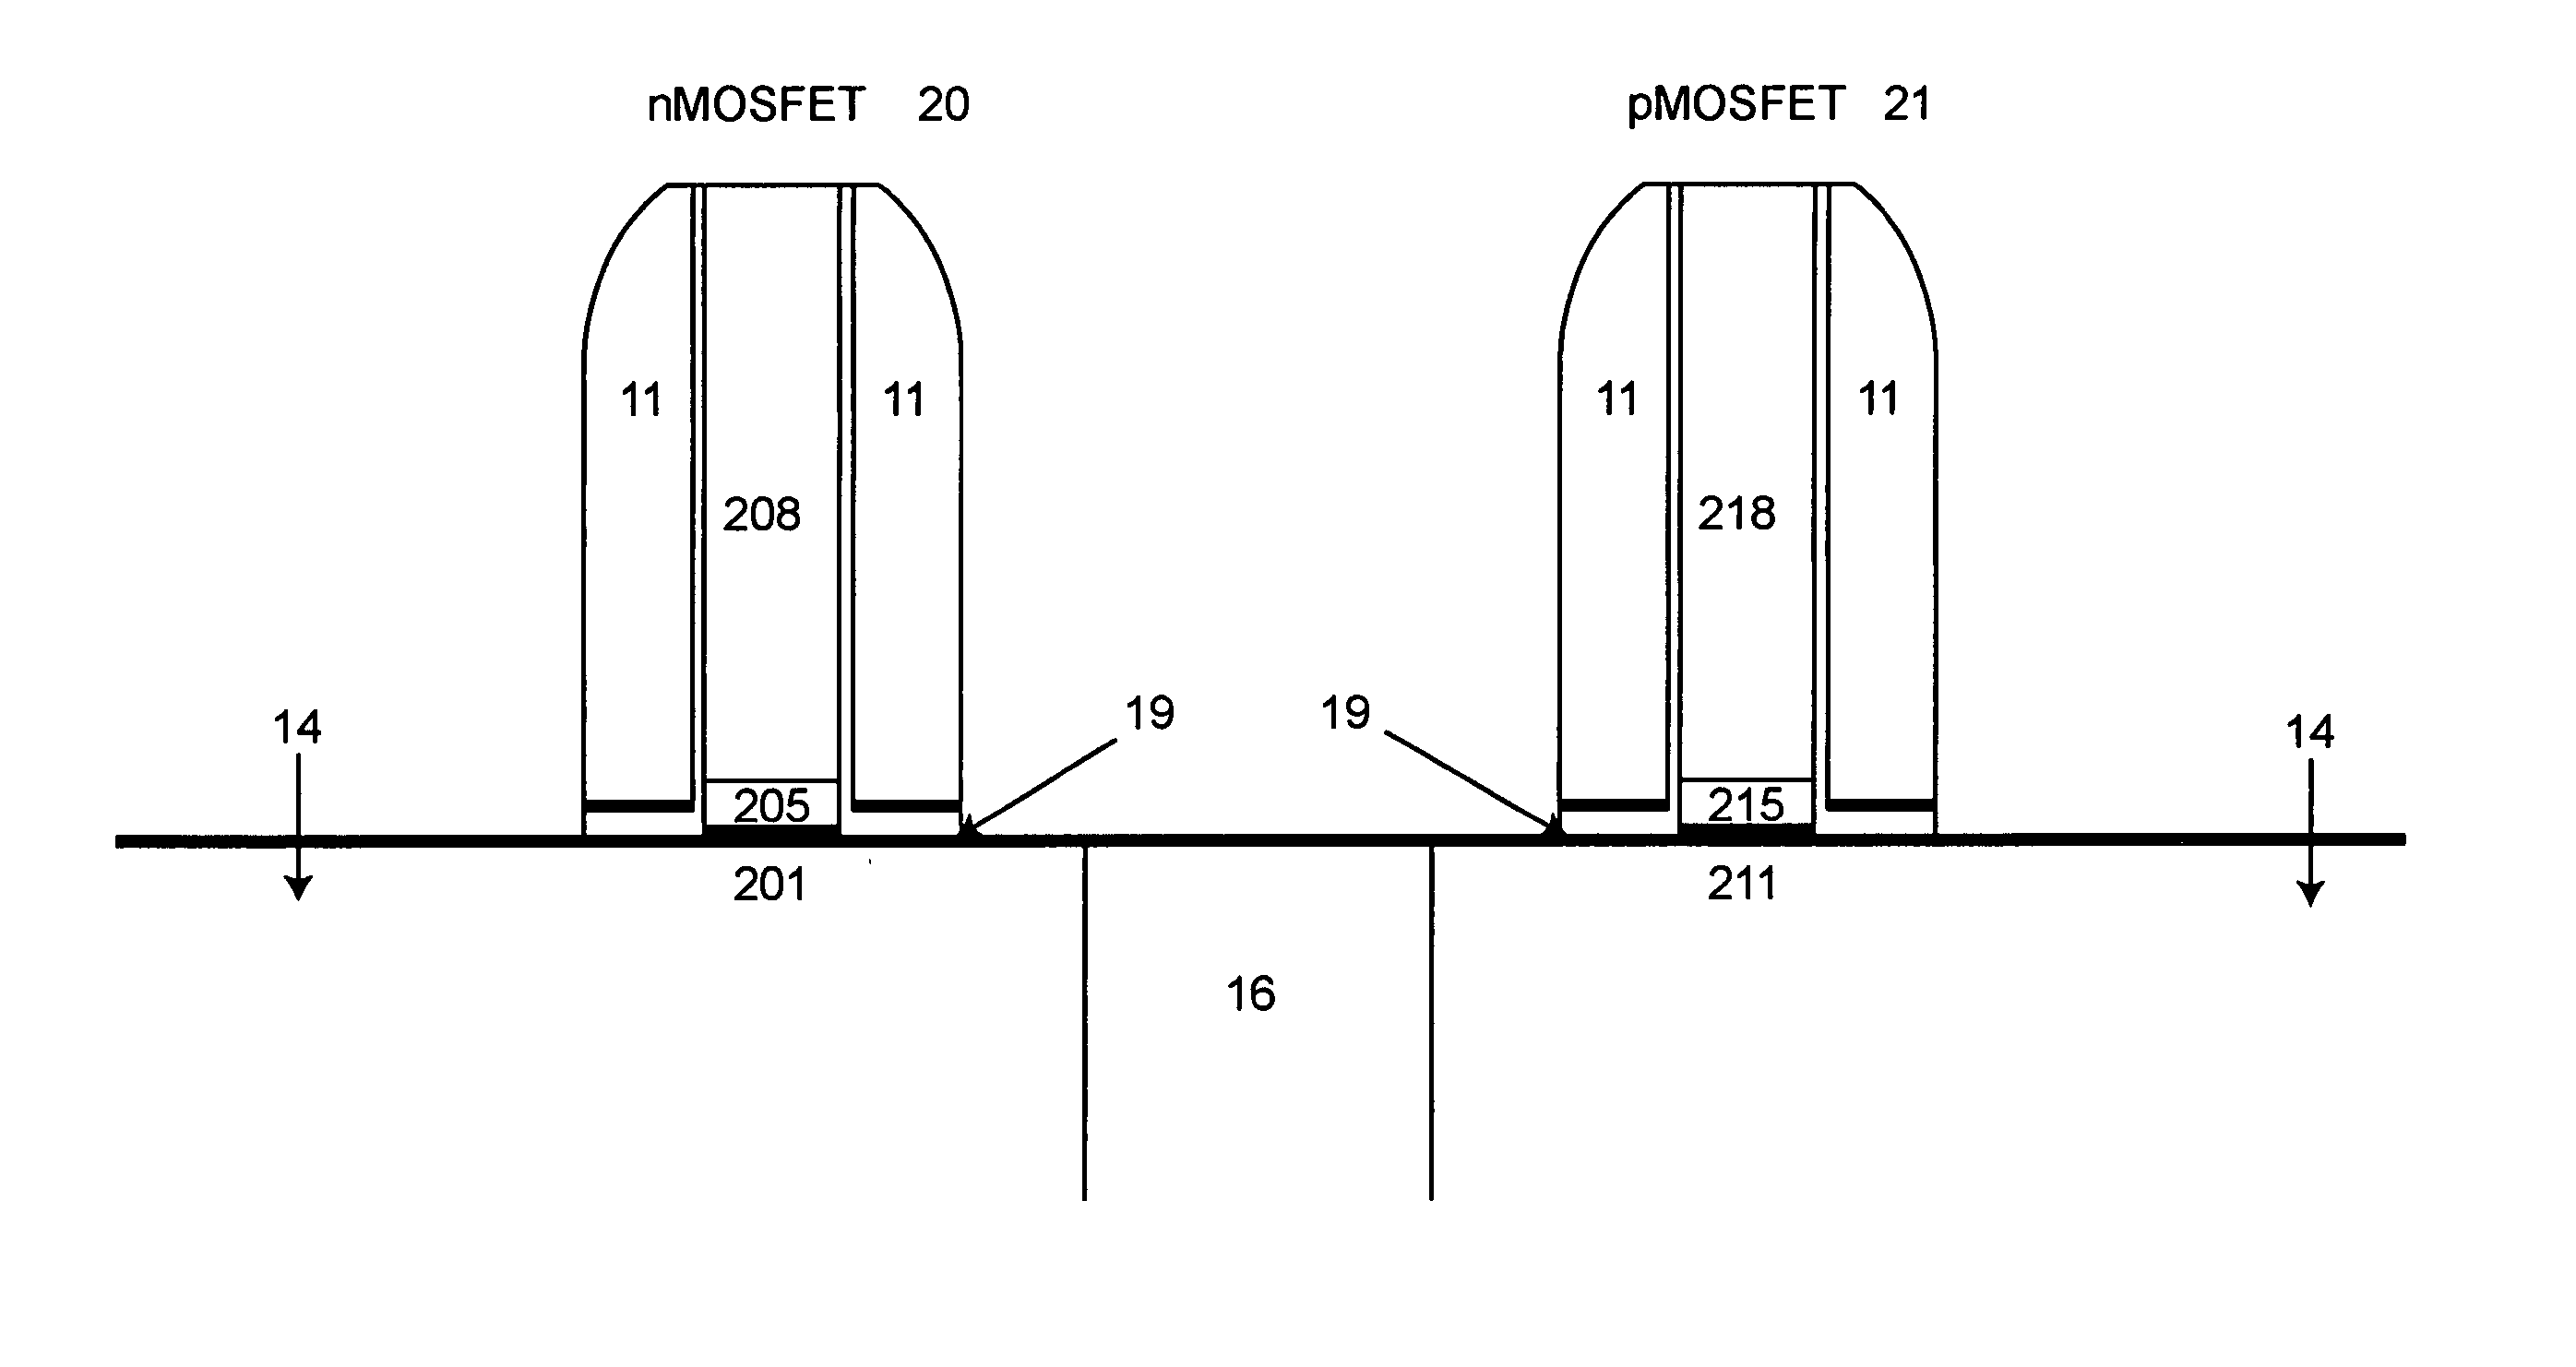 Structure and method to enhance both nFET and pFET performance using different kinds of stressed layers